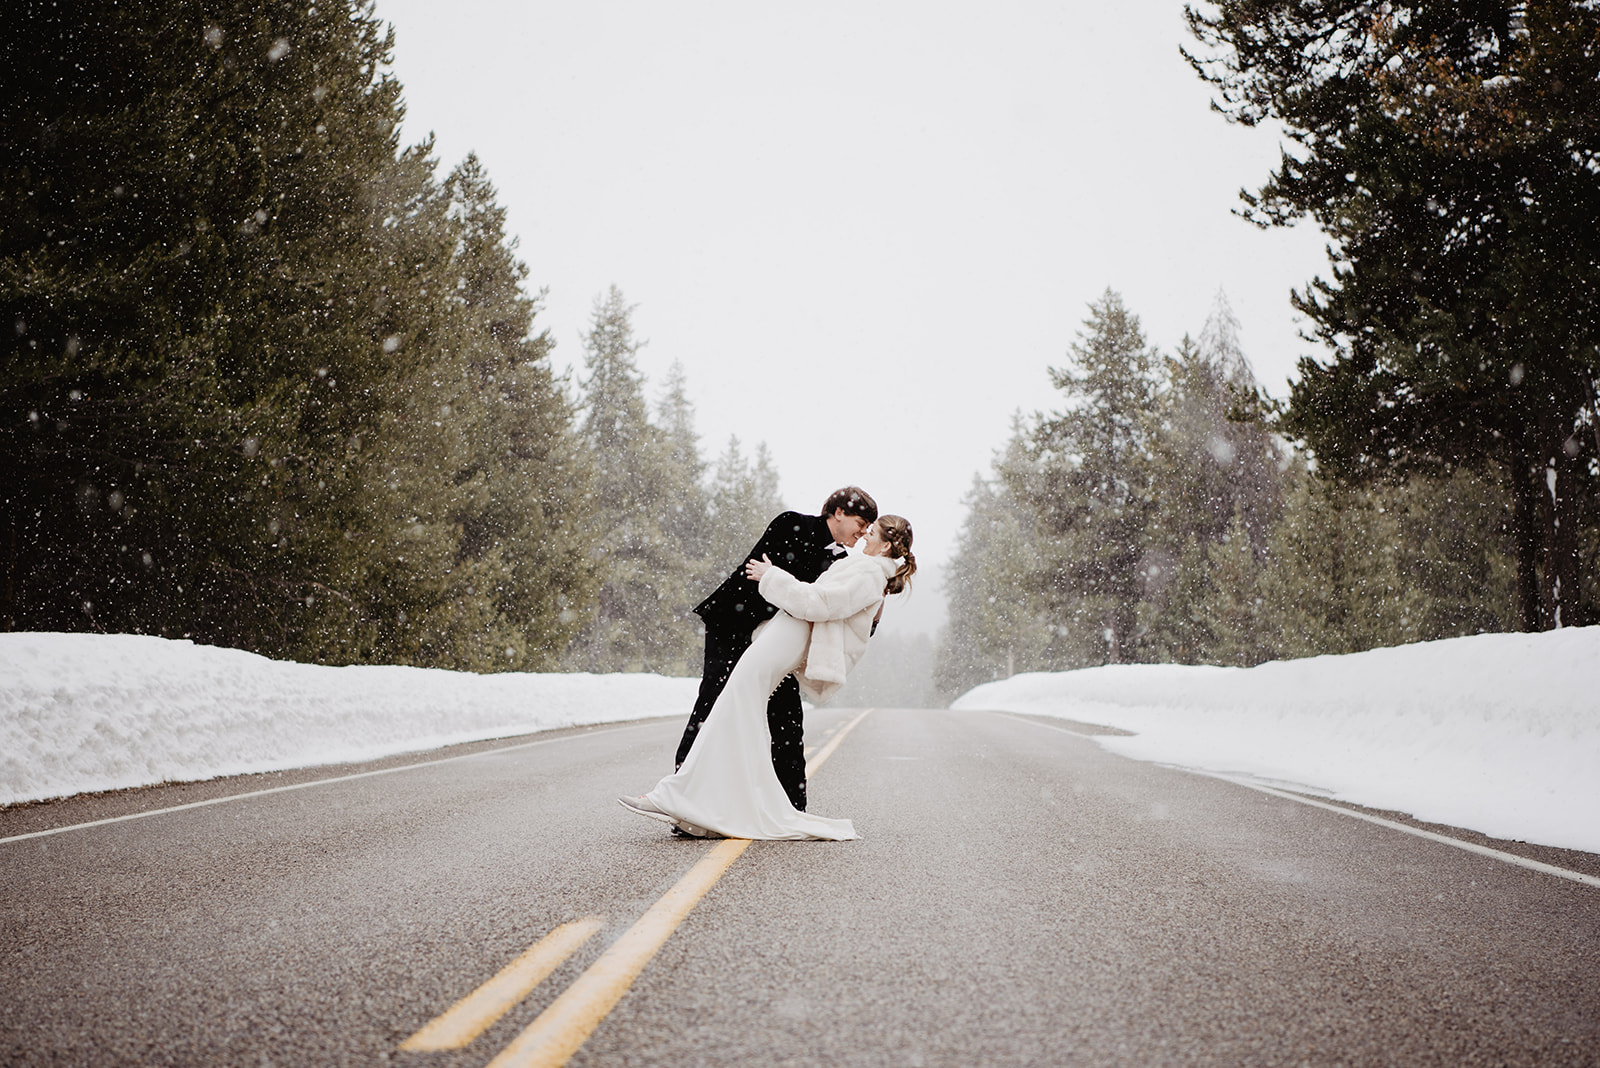 Grand Teton photographer captures couple kissing in street while snowing